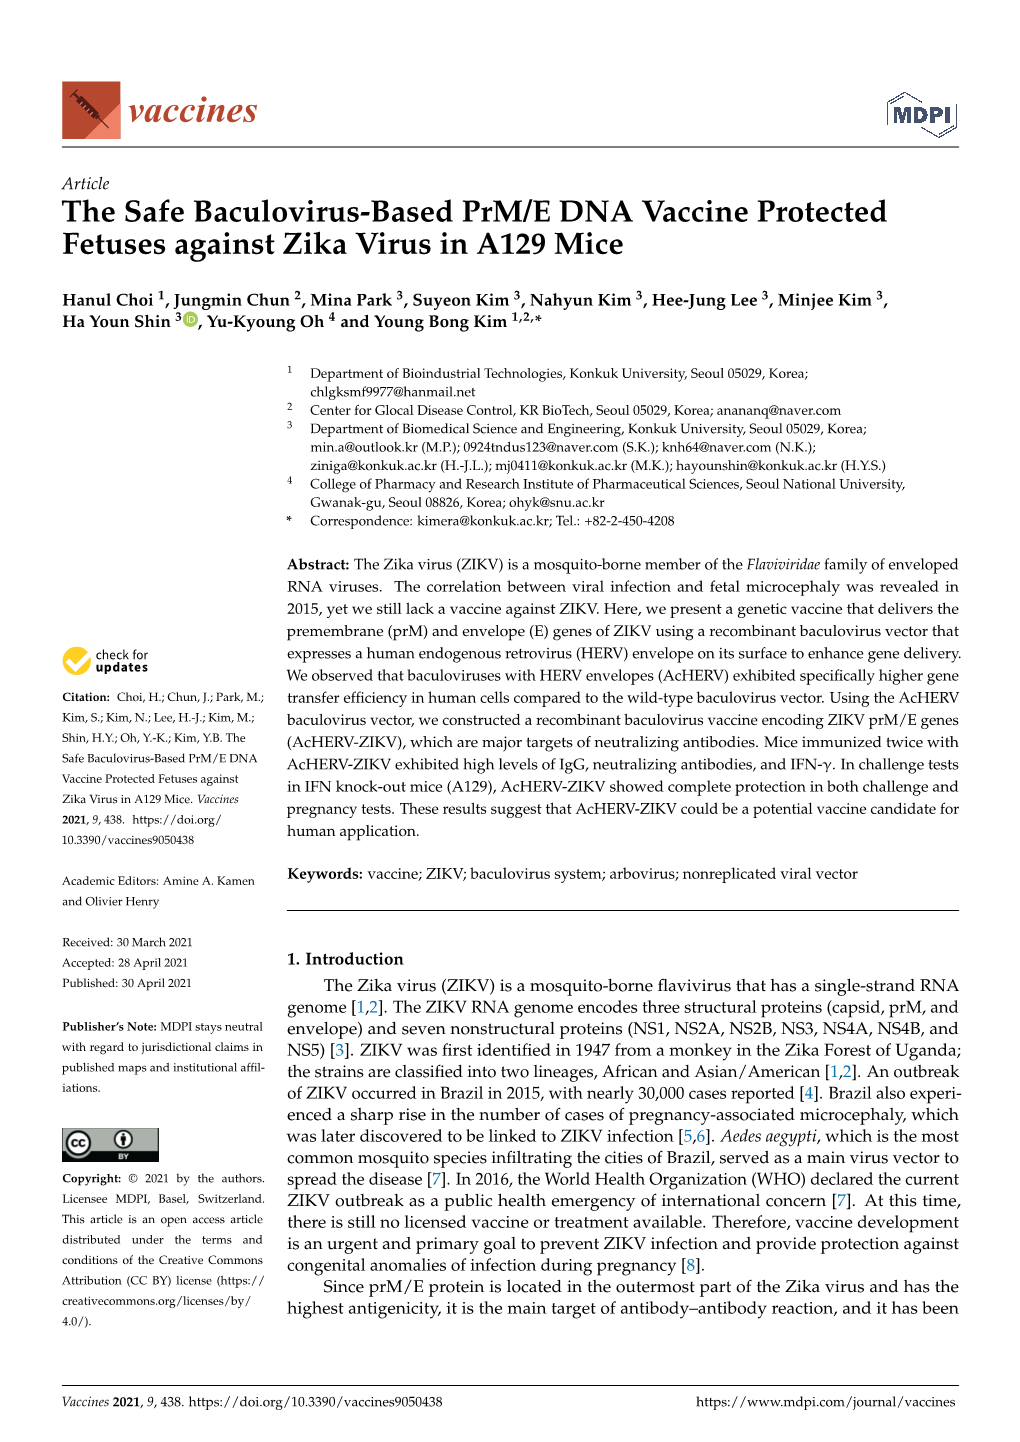 The Safe Baculovirus-Based Prm/E DNA Vaccine Protected Fetuses Against Zika Virus in A129 Mice